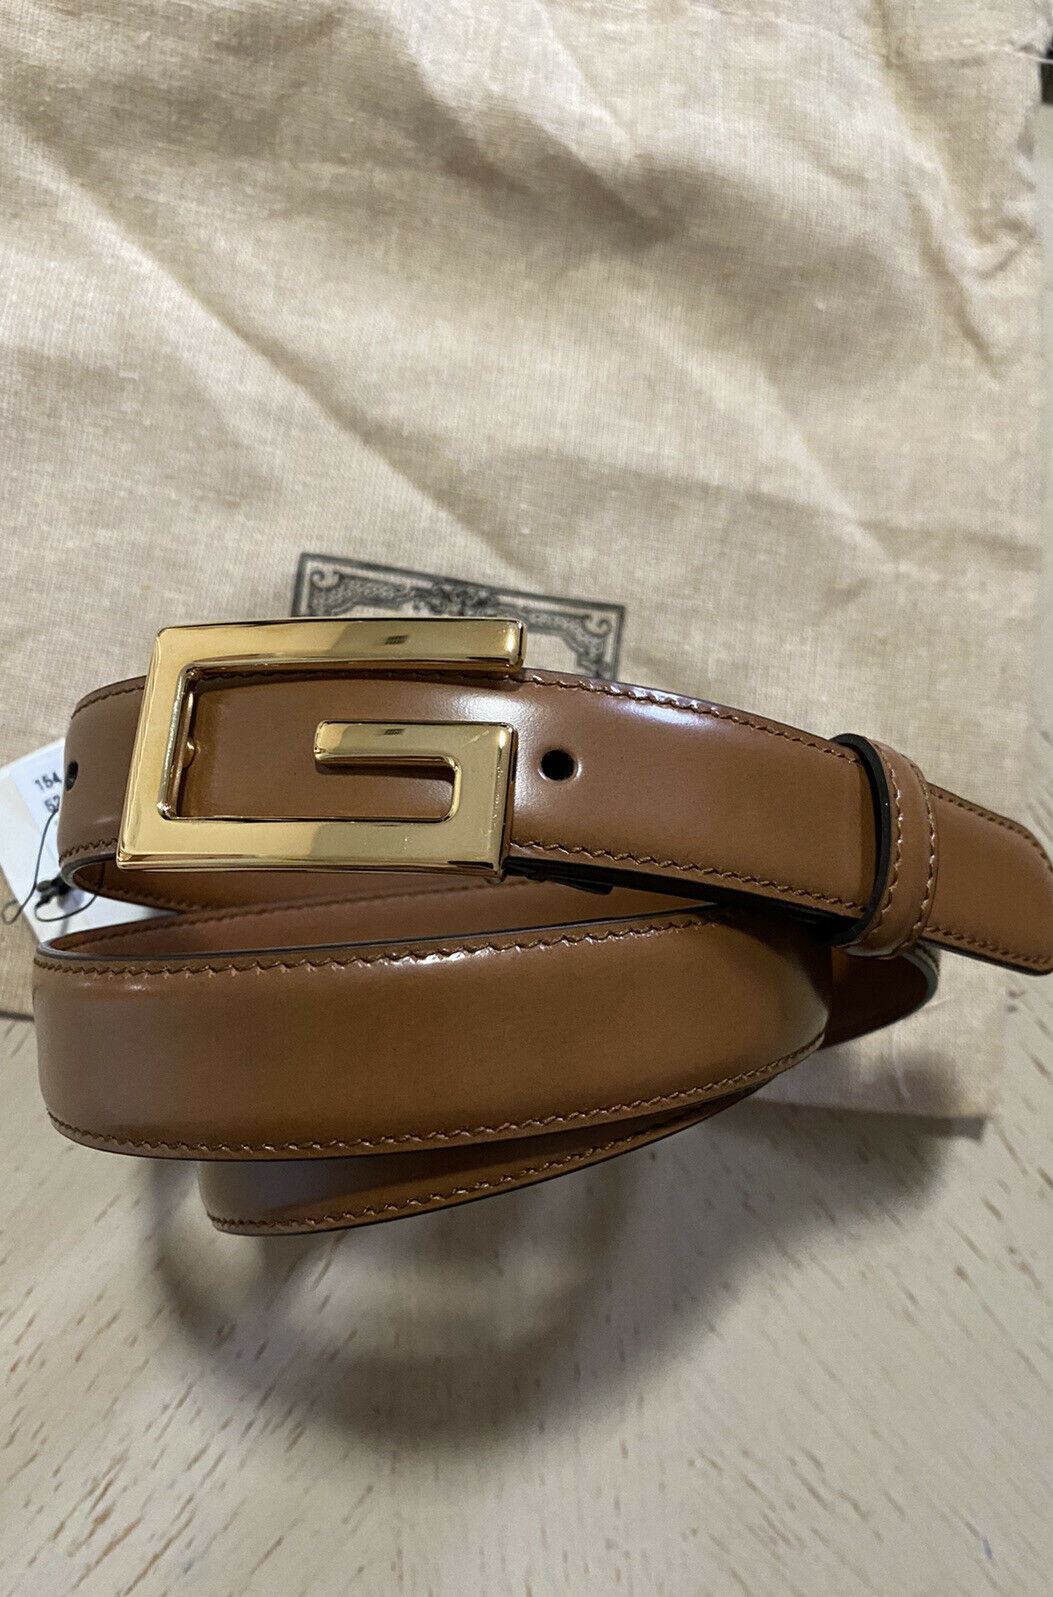 New $890 Gucci Mens Genuine Leather GG Belt Brown 110/44 Italy